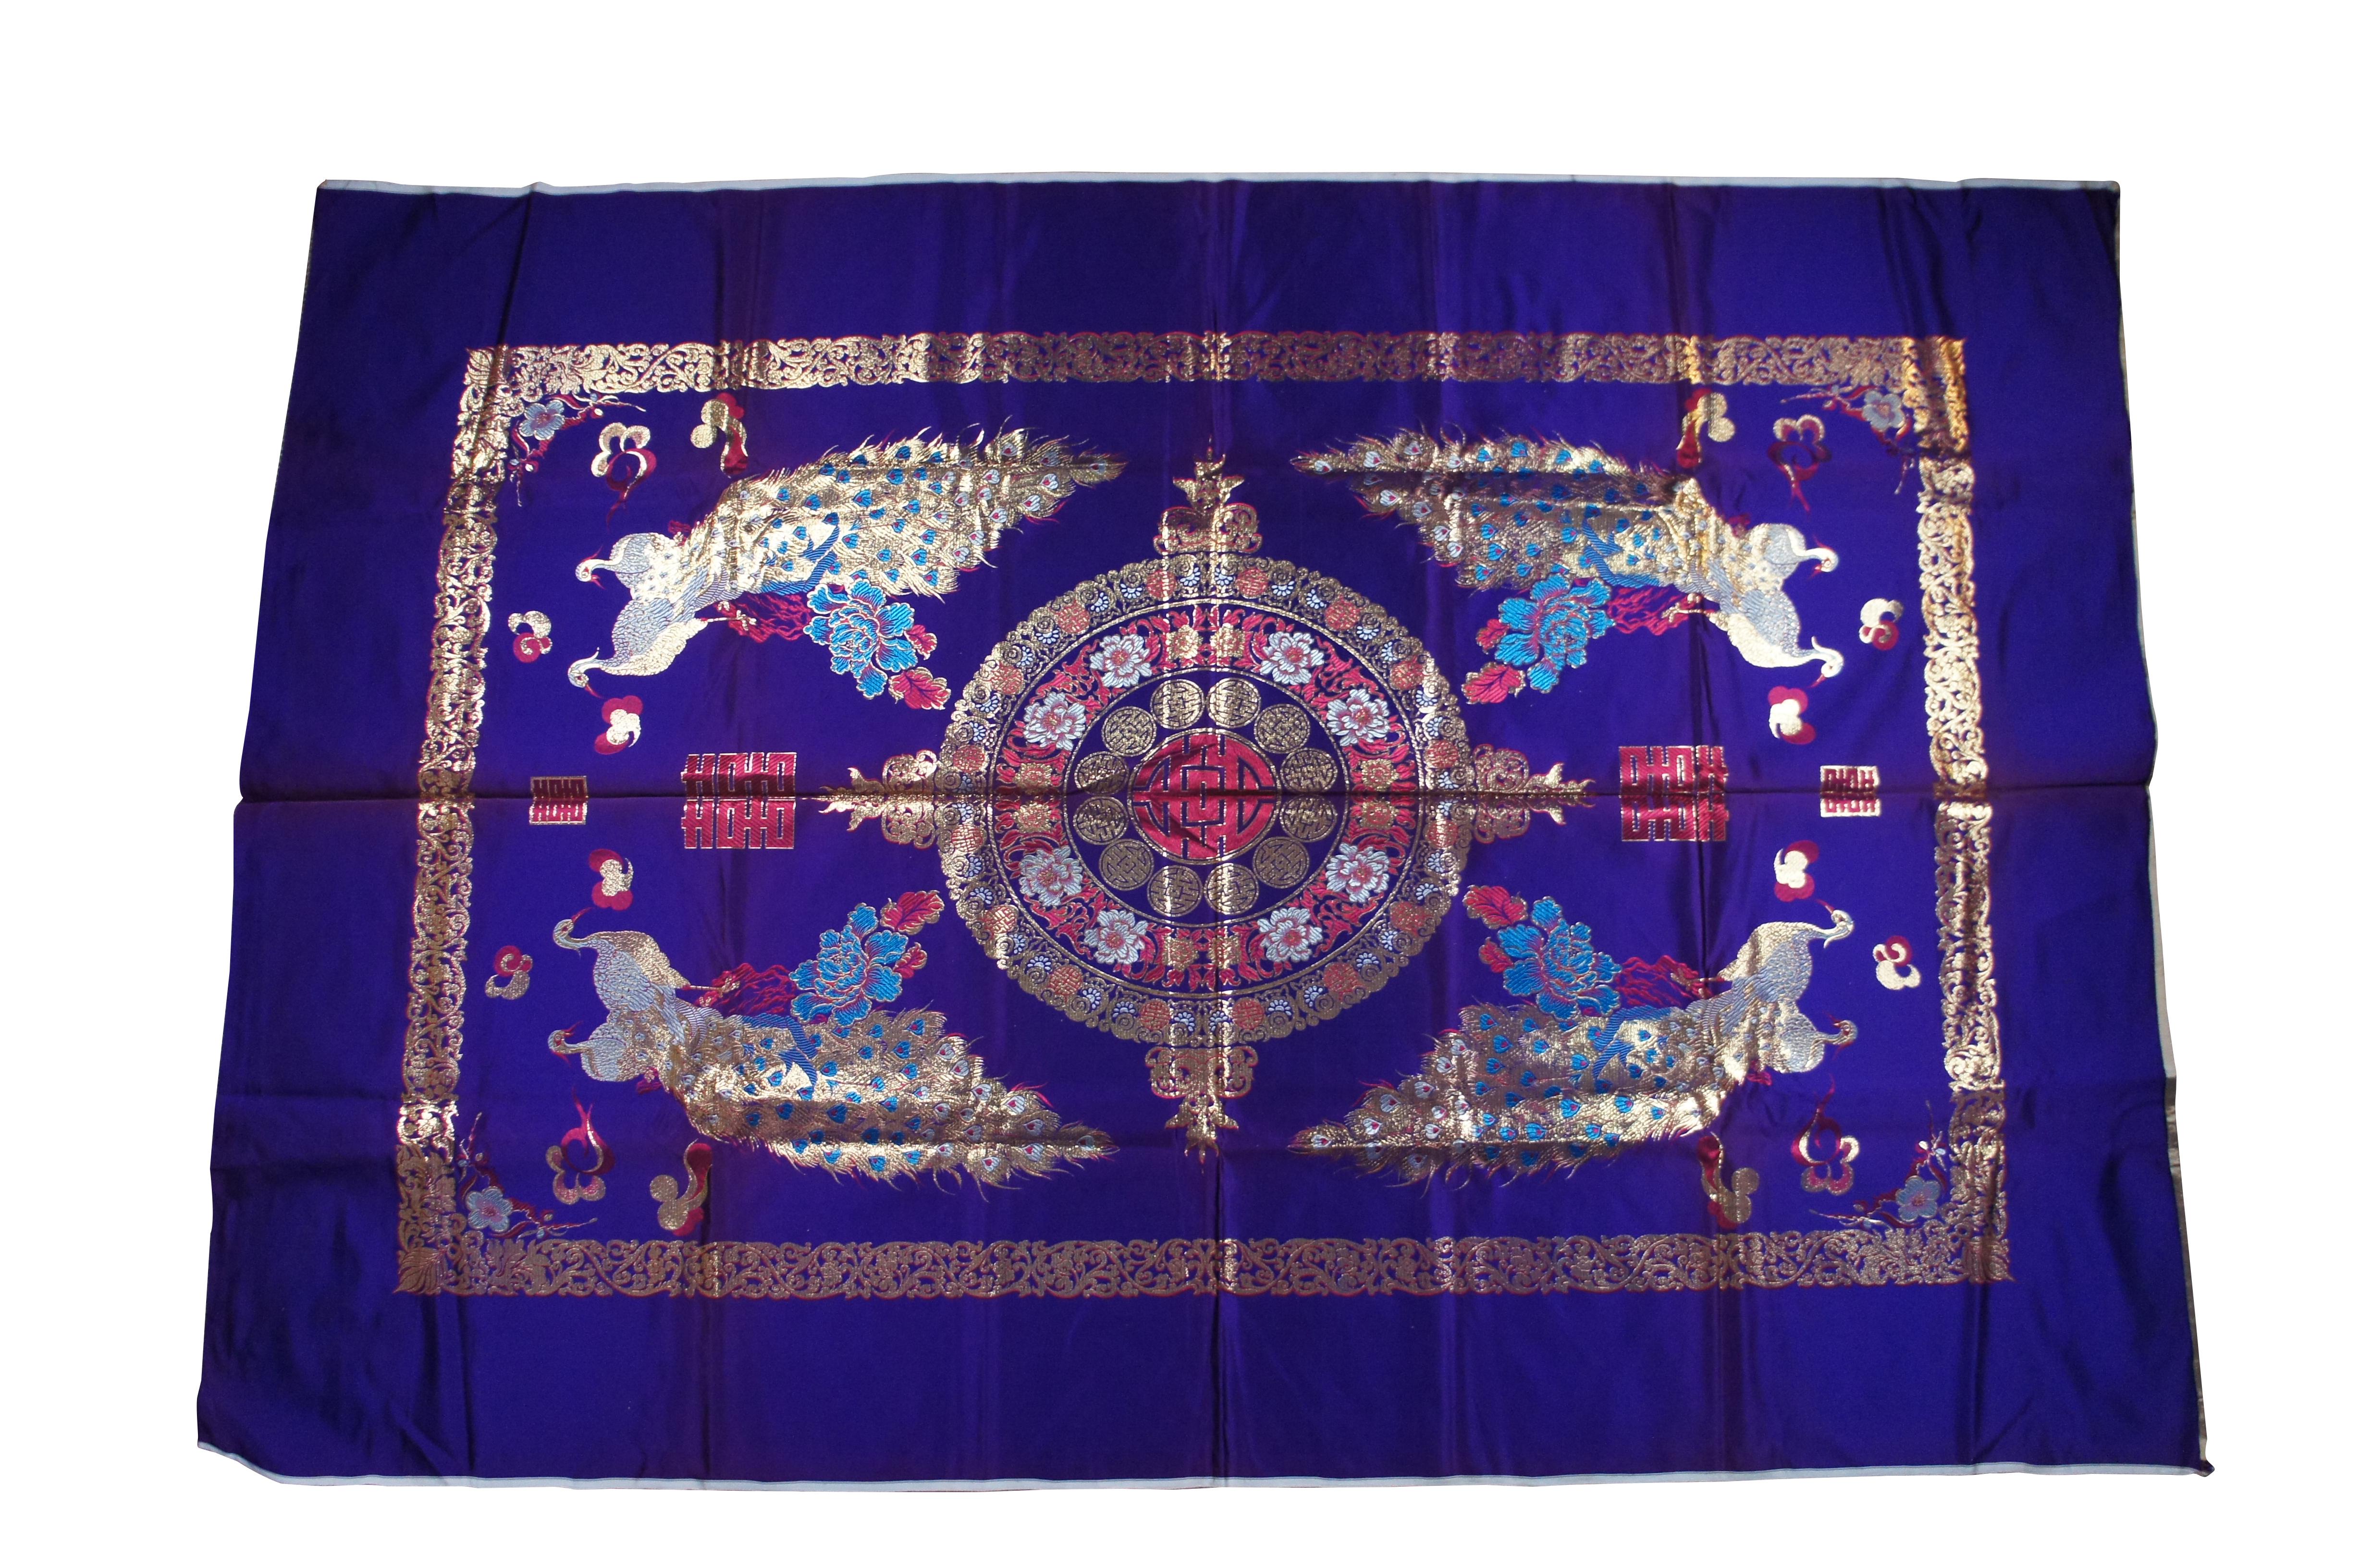 Two vintage Korean textile tapestries.  Made of silk featuring metallic gold embroidery with medallions, peacocks and dragons.  One purple, one green.  Wall hanging.  Tablecloth.

Dimensions:
Un-Hemmed - 83” x 59” / Hemmed - 75” x 57” (Length x